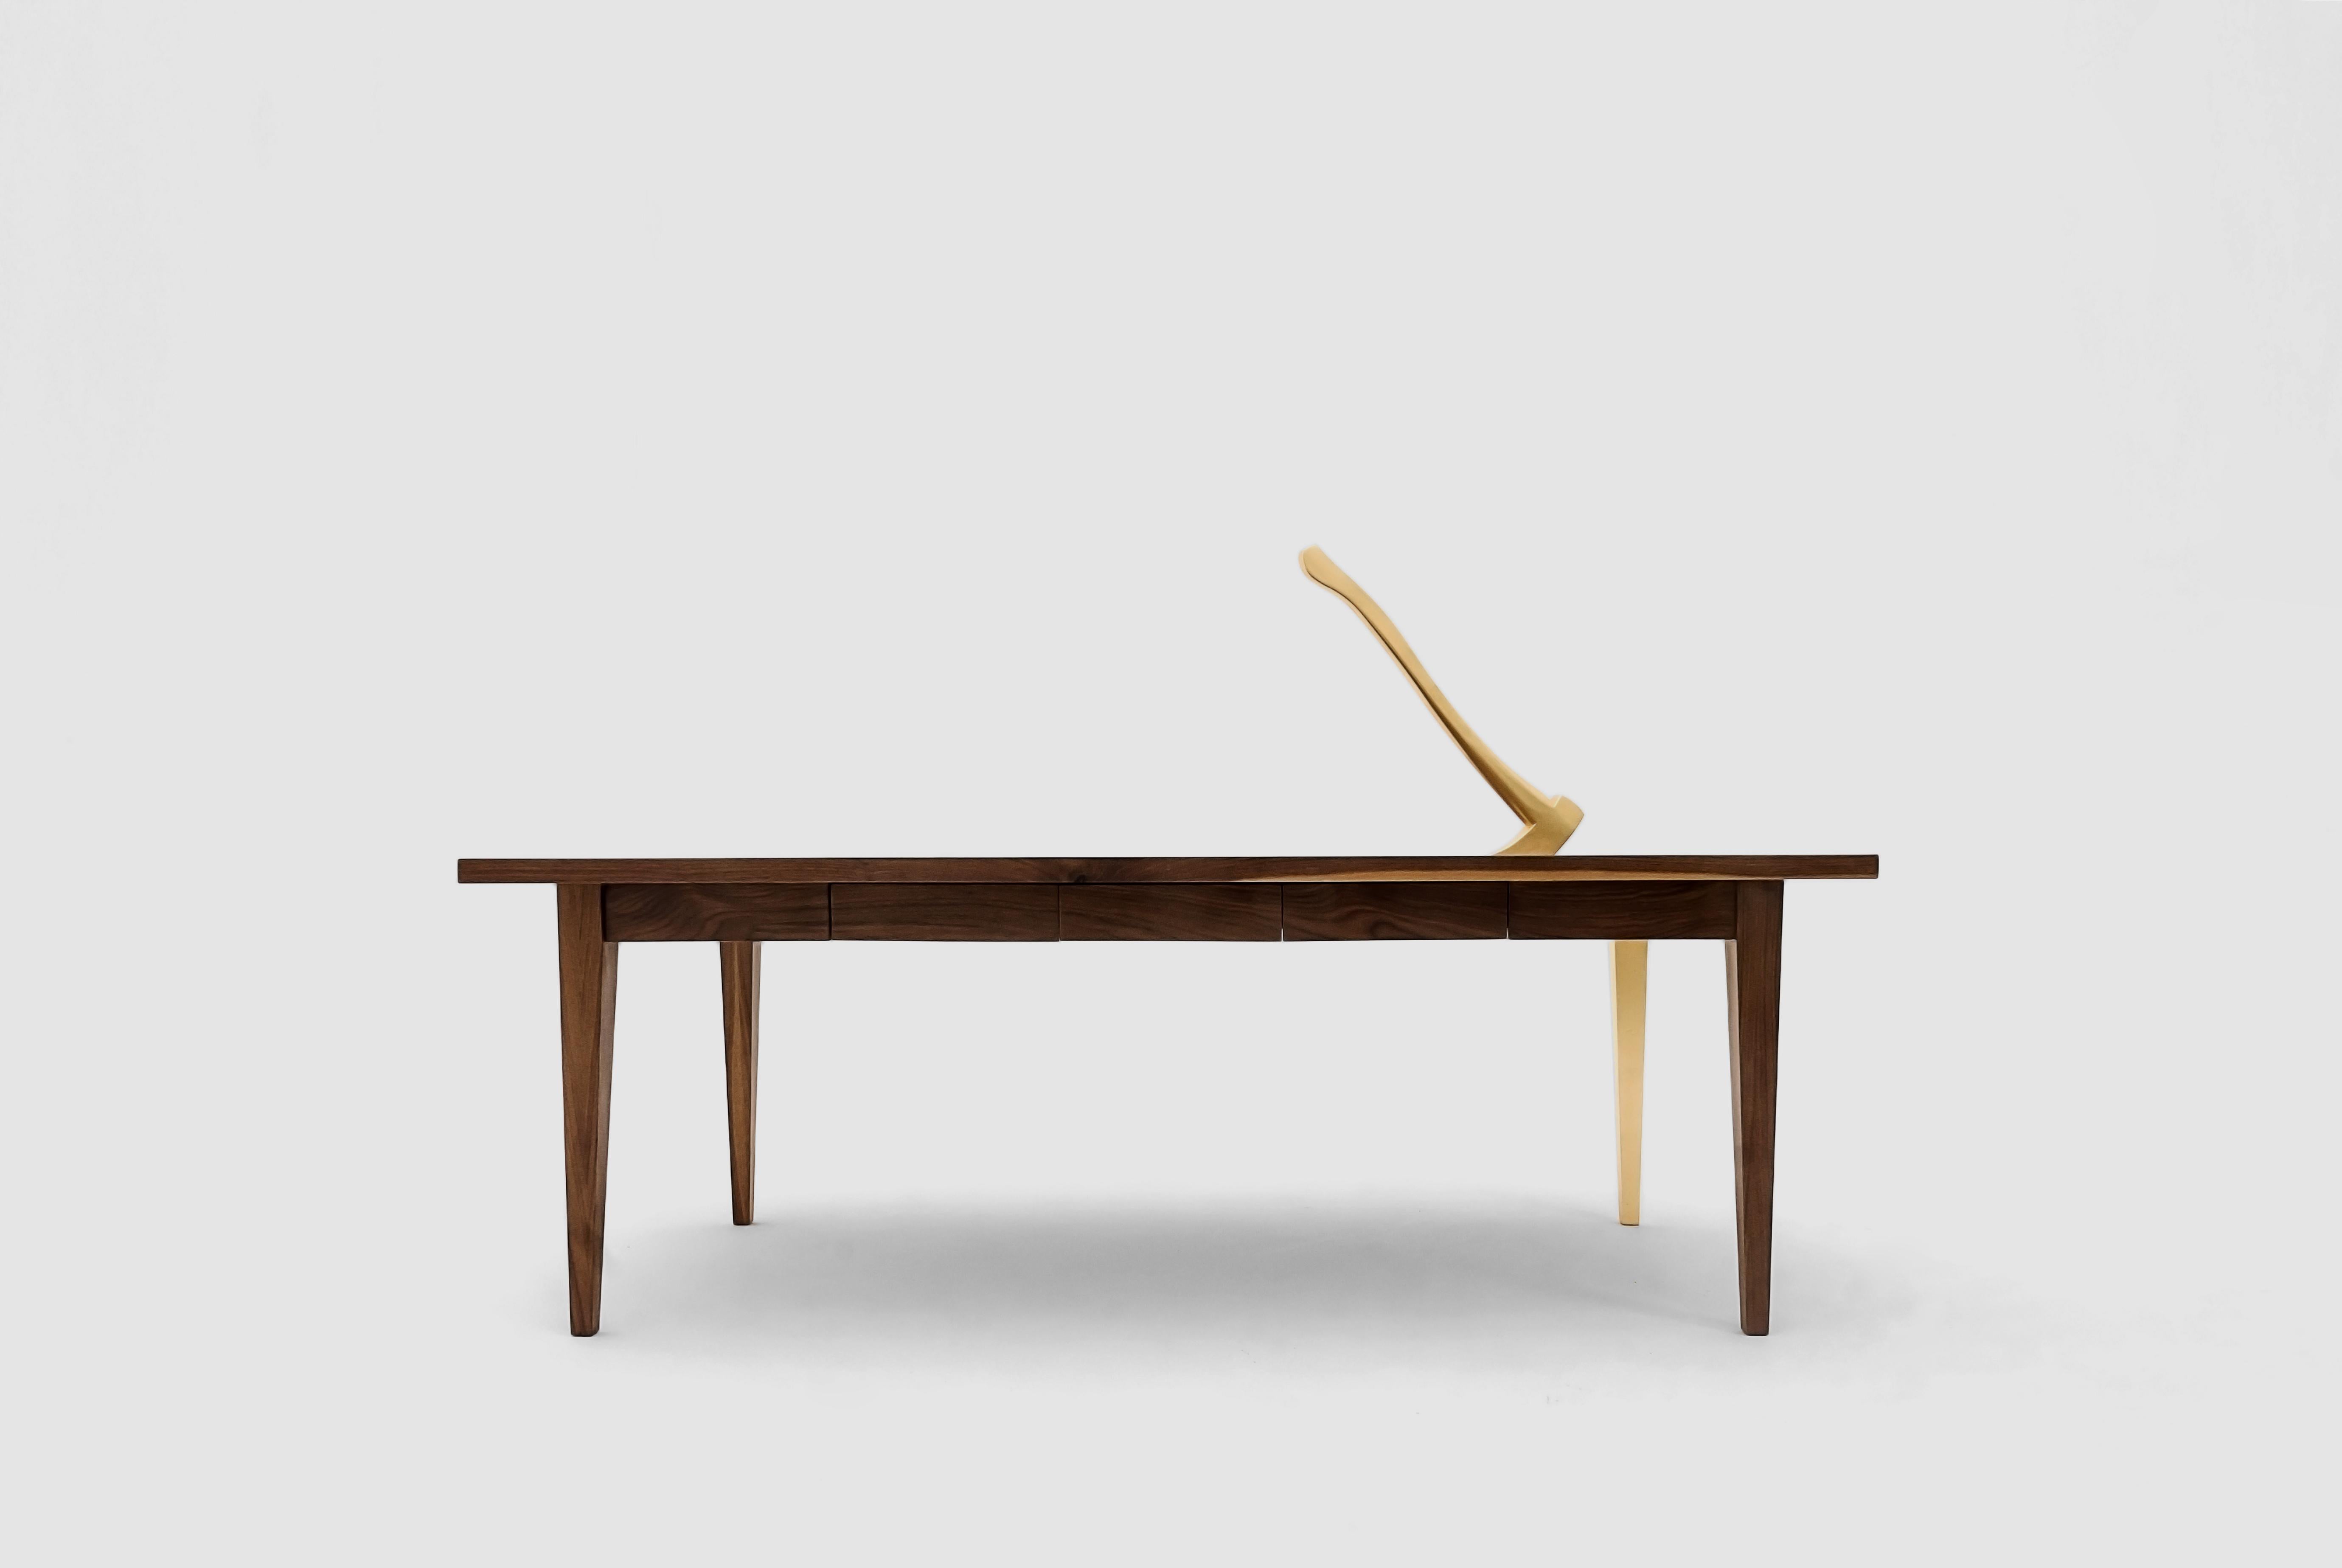 Grimm sculptured table by Hugo Lugo.
Dimensions: D 170 x W 51 x H 85 cm.
Materials: walnut wood, gold leaf.

Table made of walnut and gold leaf.

He has a degree in Visual Arts from the University of Montemorelos in N.L. He studied the Master